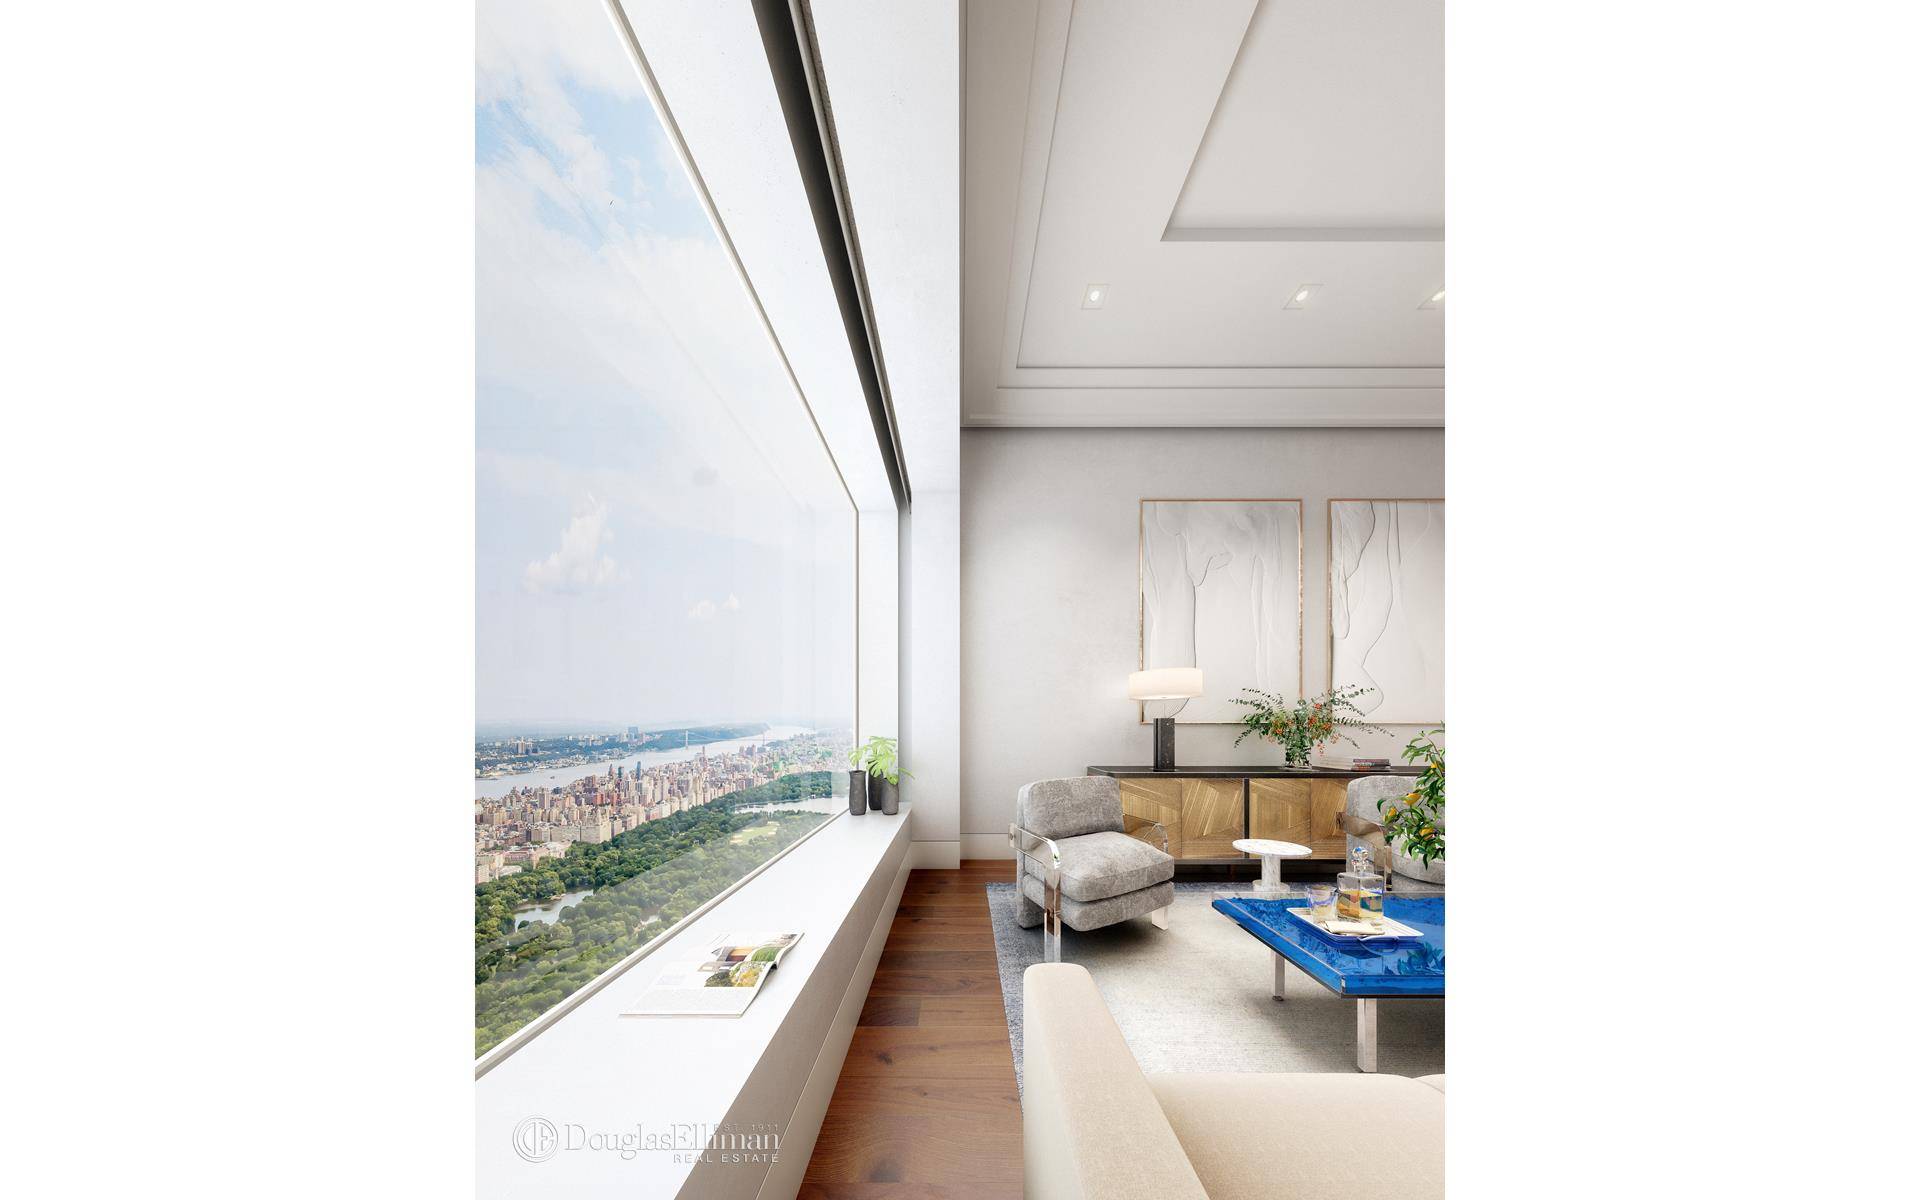 FULL FLOOR PENTHOUSE The 82nd Floor at 432 Park AvenueOccupying over 8, 000 square feet, perched over 1, 100 feet in the air with absolutely breathtaking panoramic 360 degree views ...